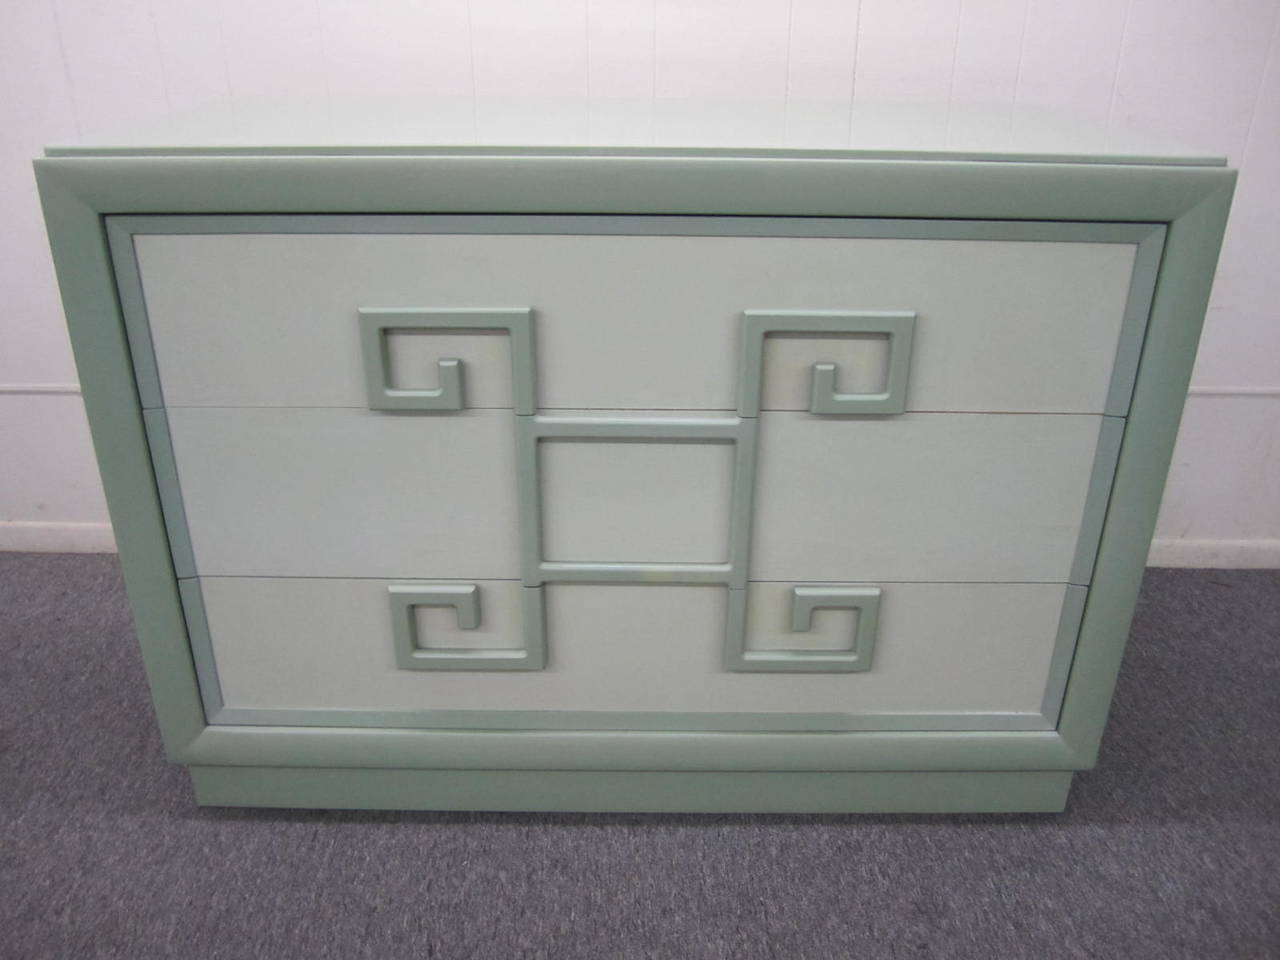 Fabulous chest of drawers or dresser by Kittinger from their earliest Mandarin collection with bold Greek key drawer handles. Retains its original two-toned light green lacquer finish in very nice vintage condition. Original Kittinger paper label in